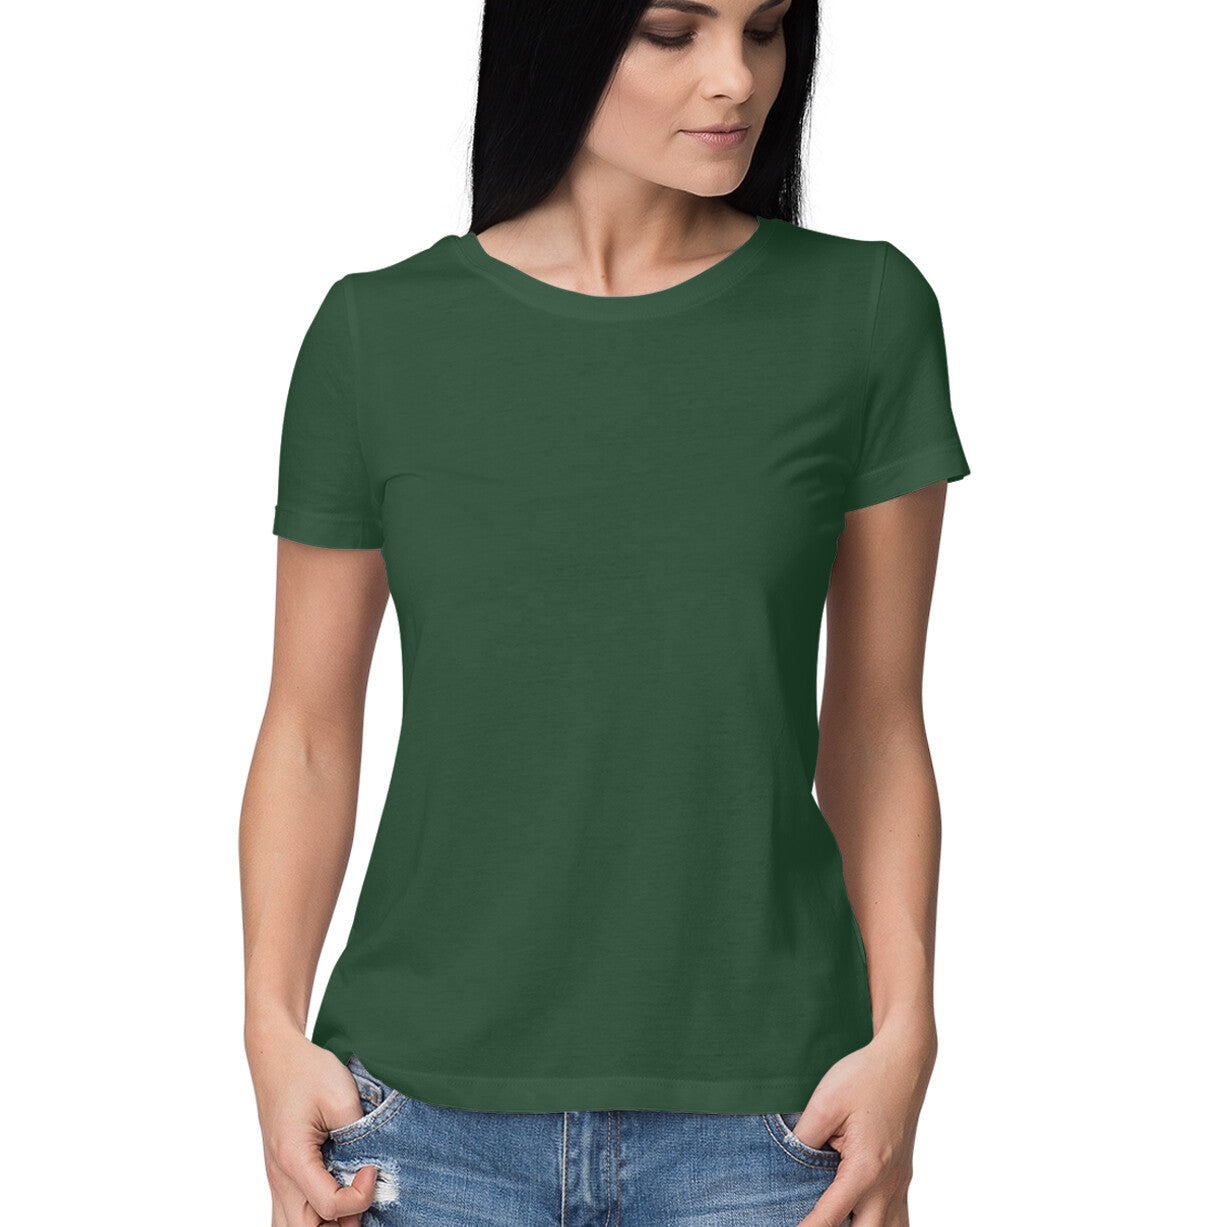 Solid women's round neck cotton t-shirt from Simply Urself – simply urself